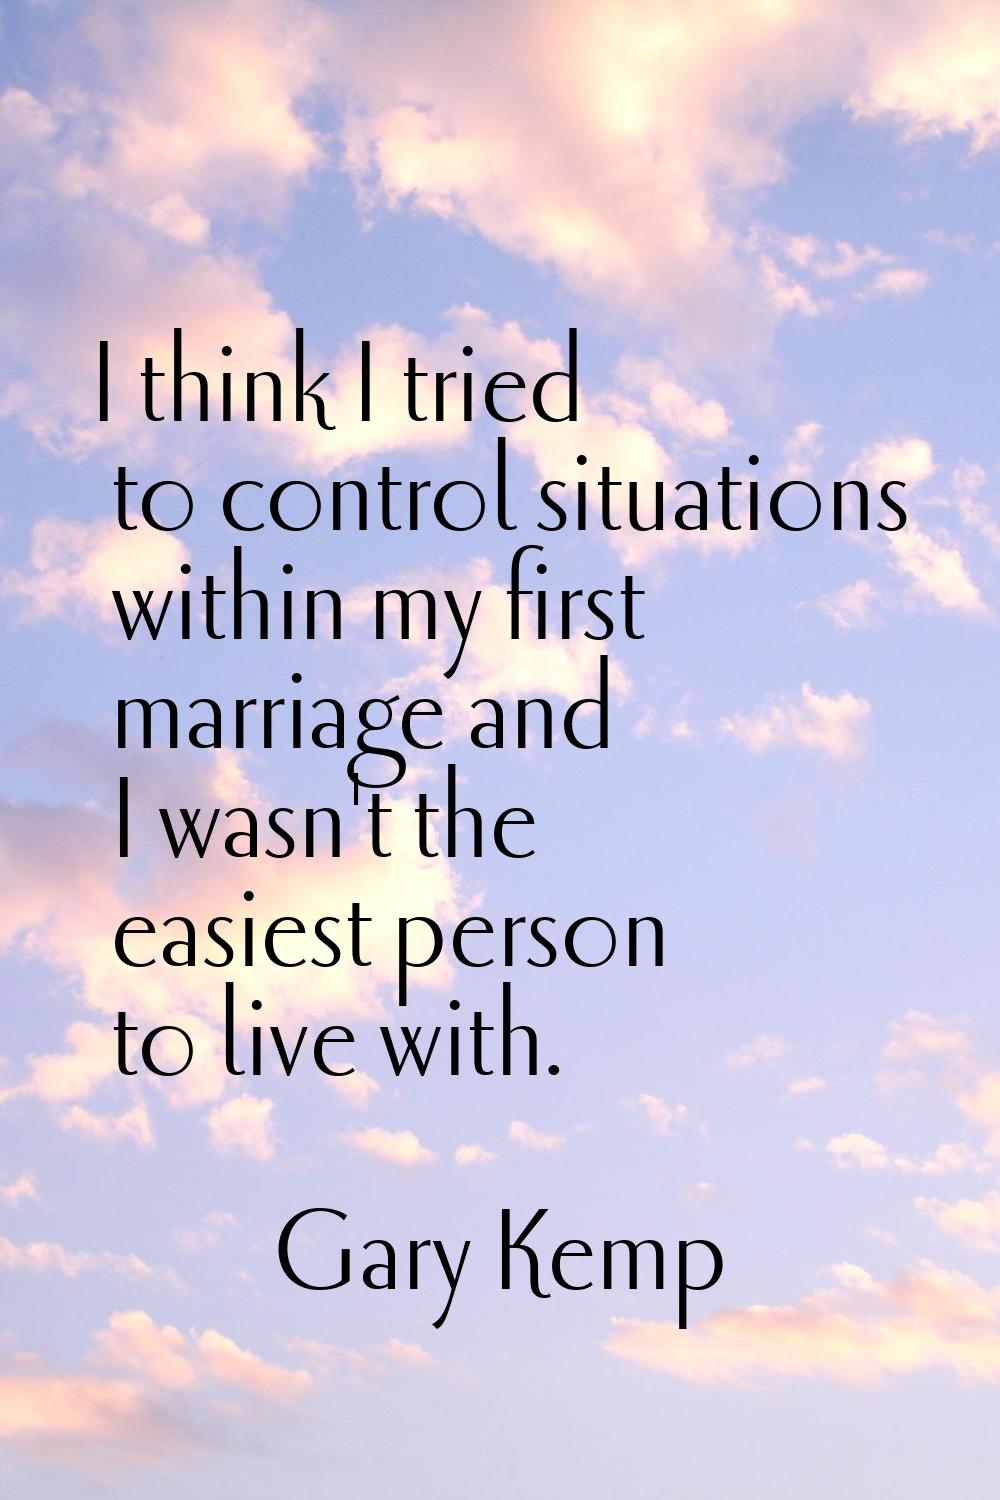 I think I tried to control situations within my first marriage and I wasn't the easiest person to l